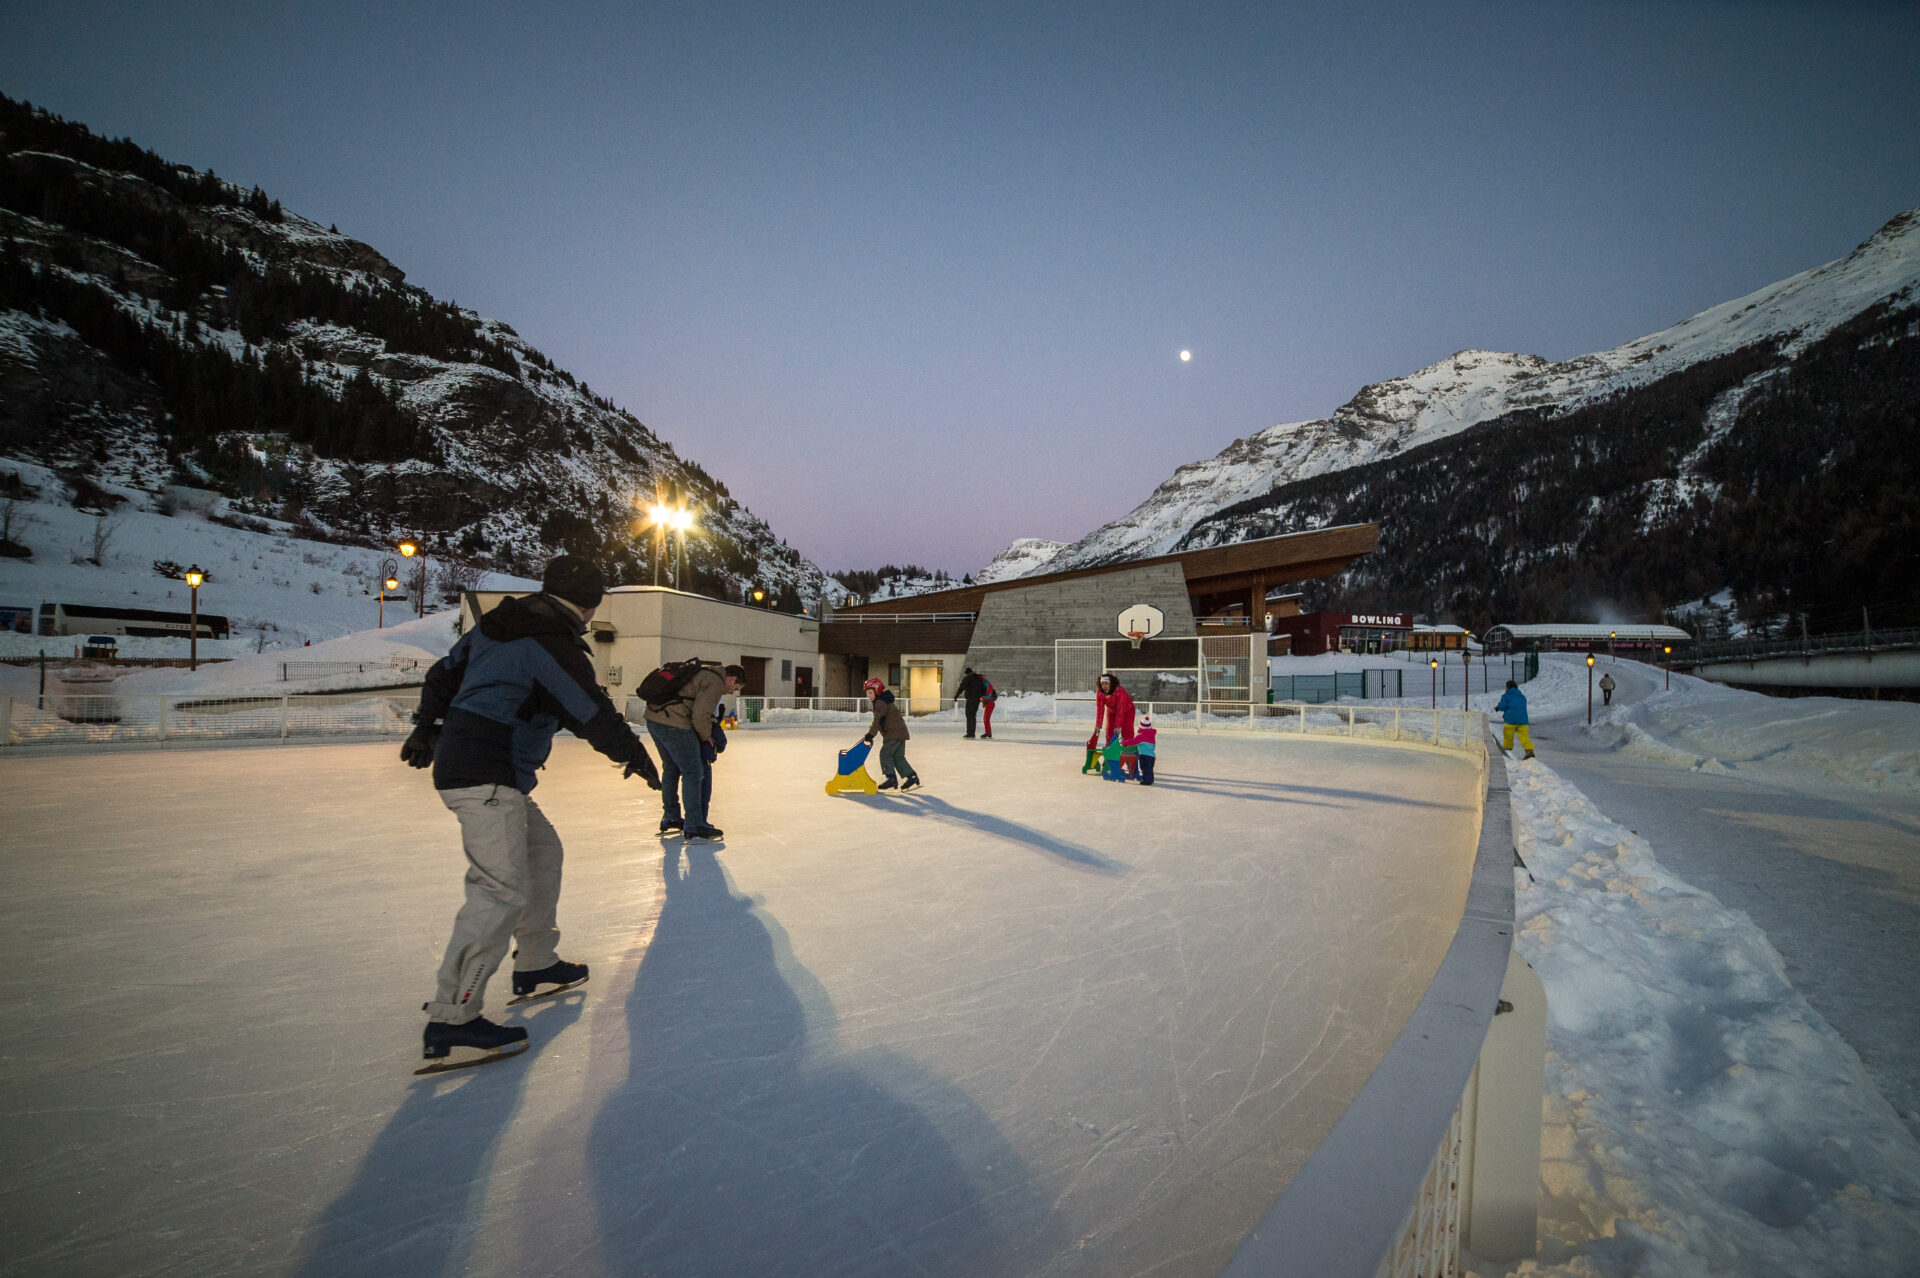 The Val Cenis ice rink